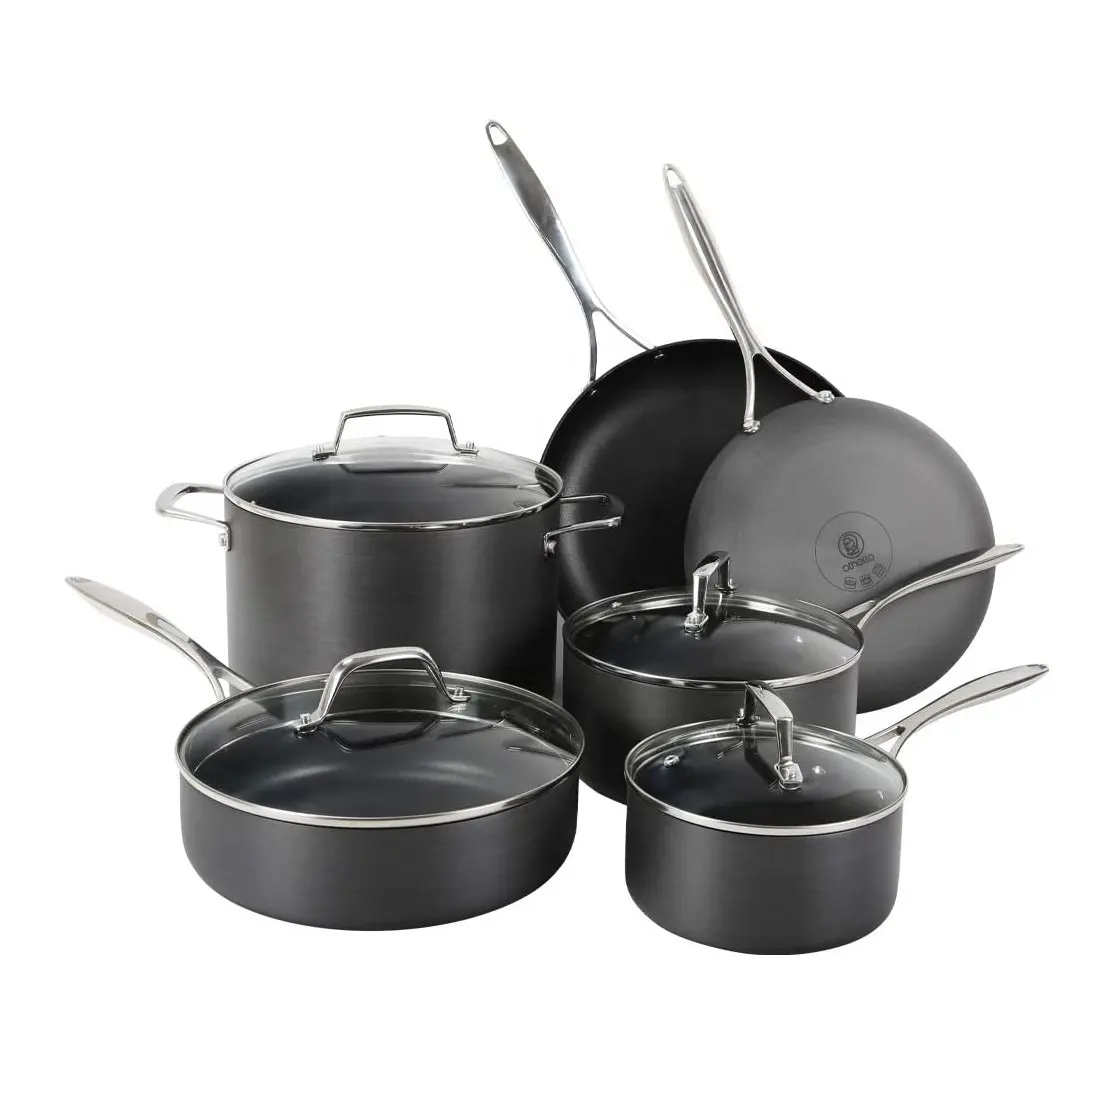 100% Pure Eco Friendly Iron Cookware Set with Steel Handle for Serving Cooking Set Iron Heavy Base For Home Hotel And Restaurant